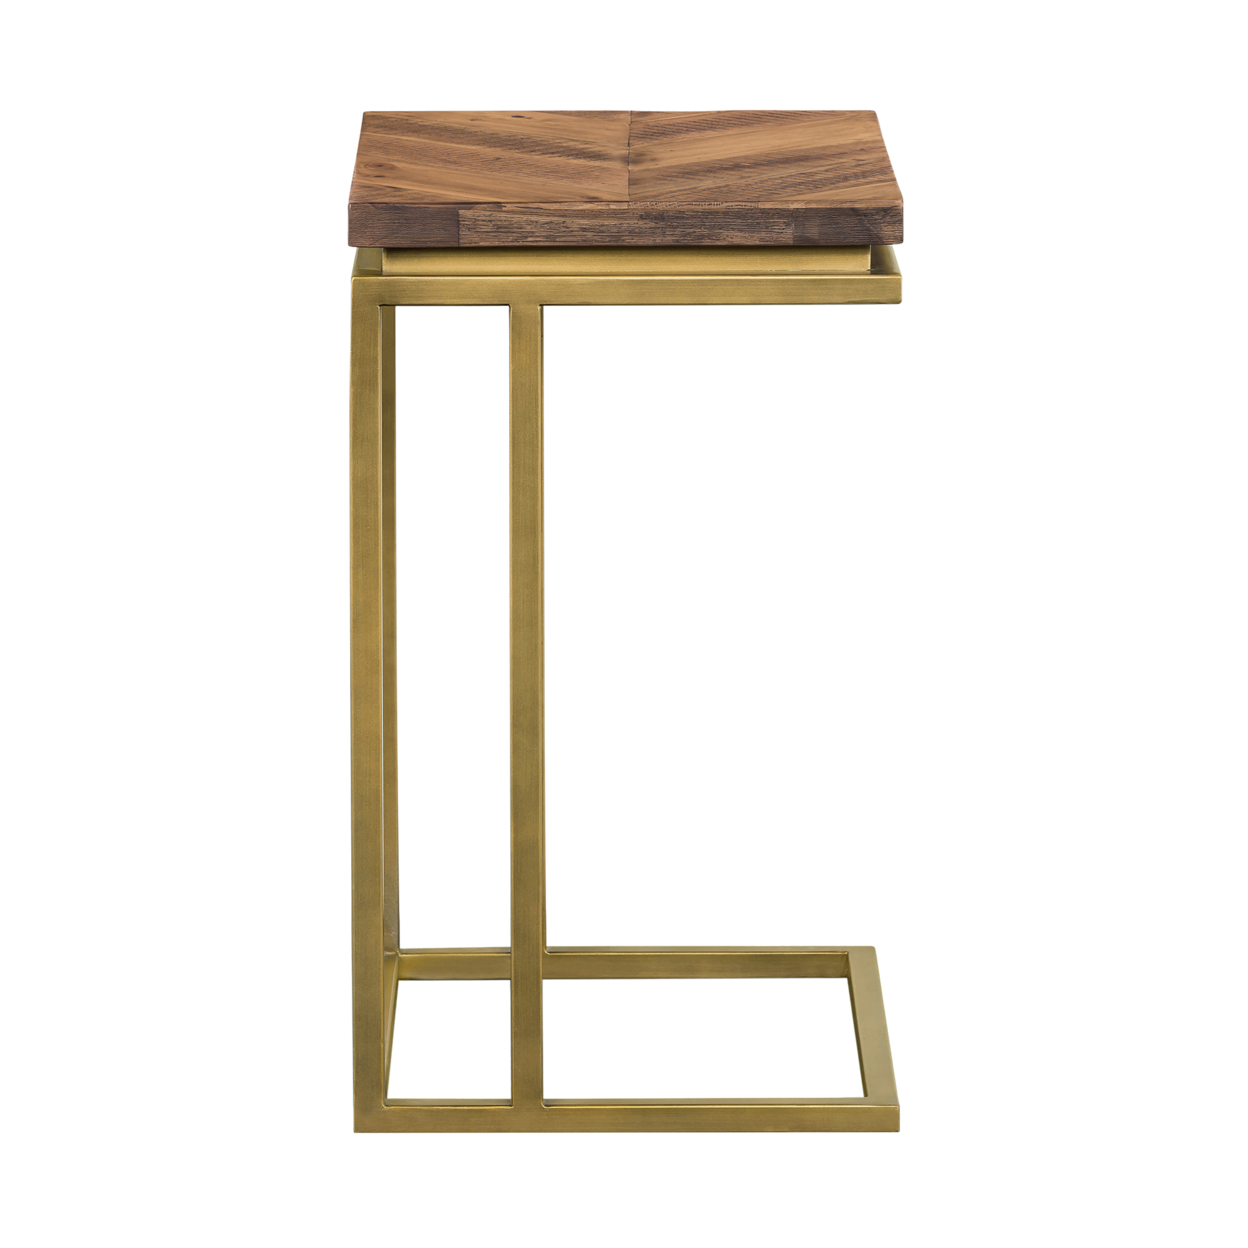 18 Inch Wooden And Metal End Table, Brown And Brass- Saltoro Sherpi